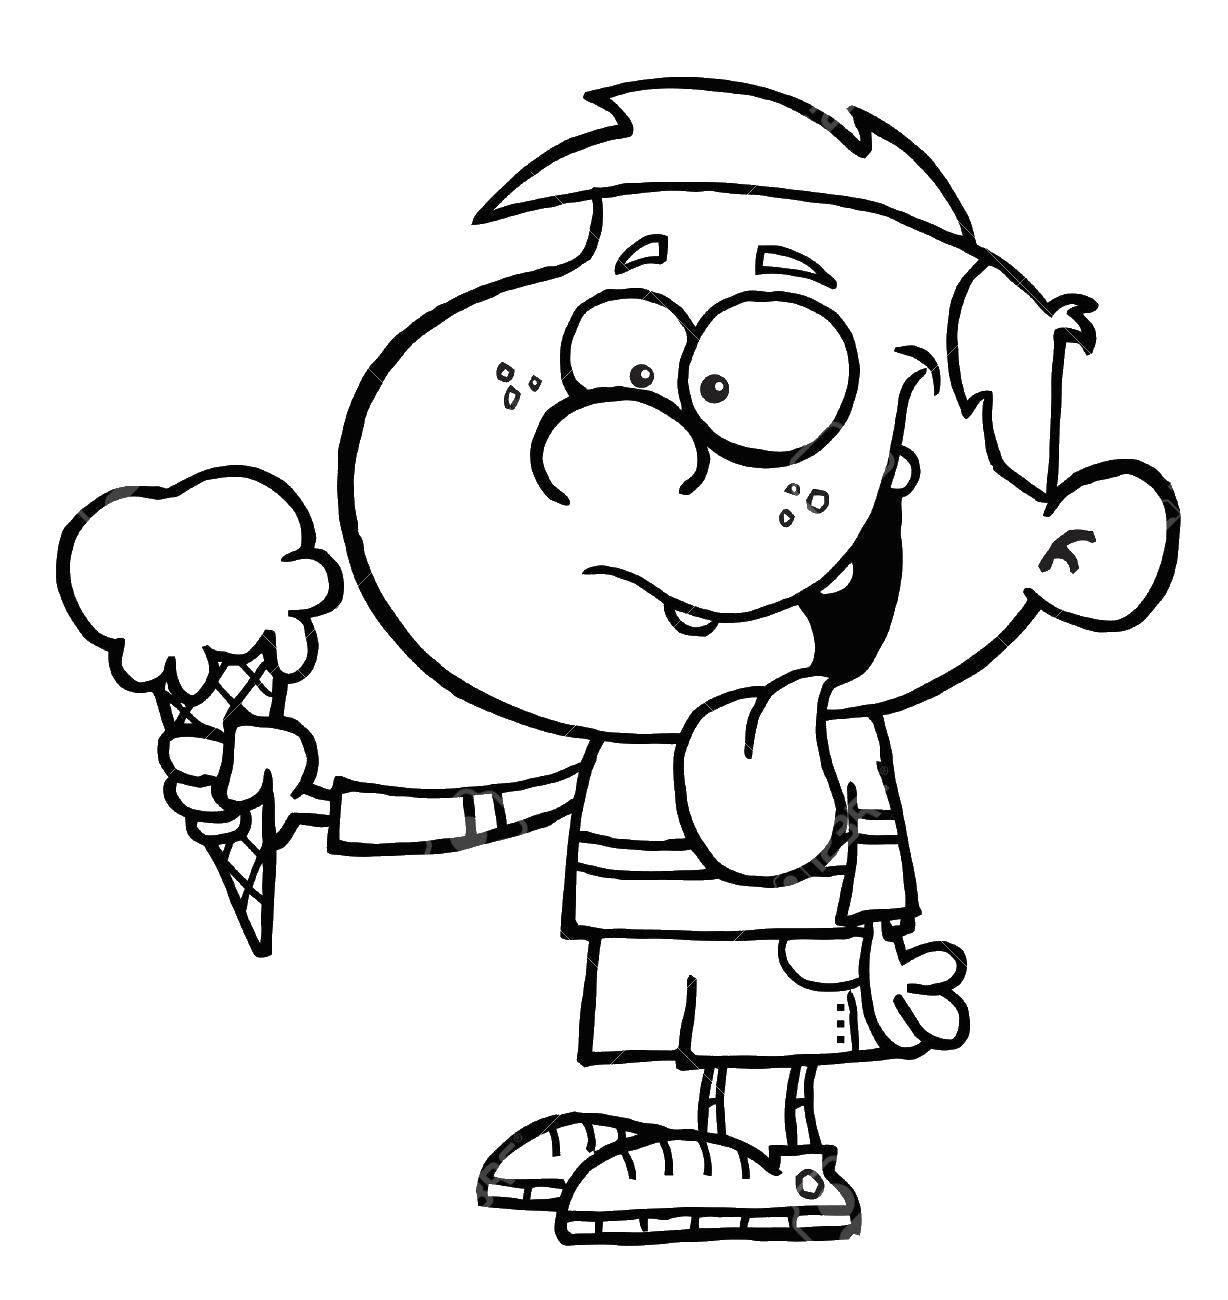 Coloring Boy with ice cream. Category ice cream. Tags:  ice cream boy.